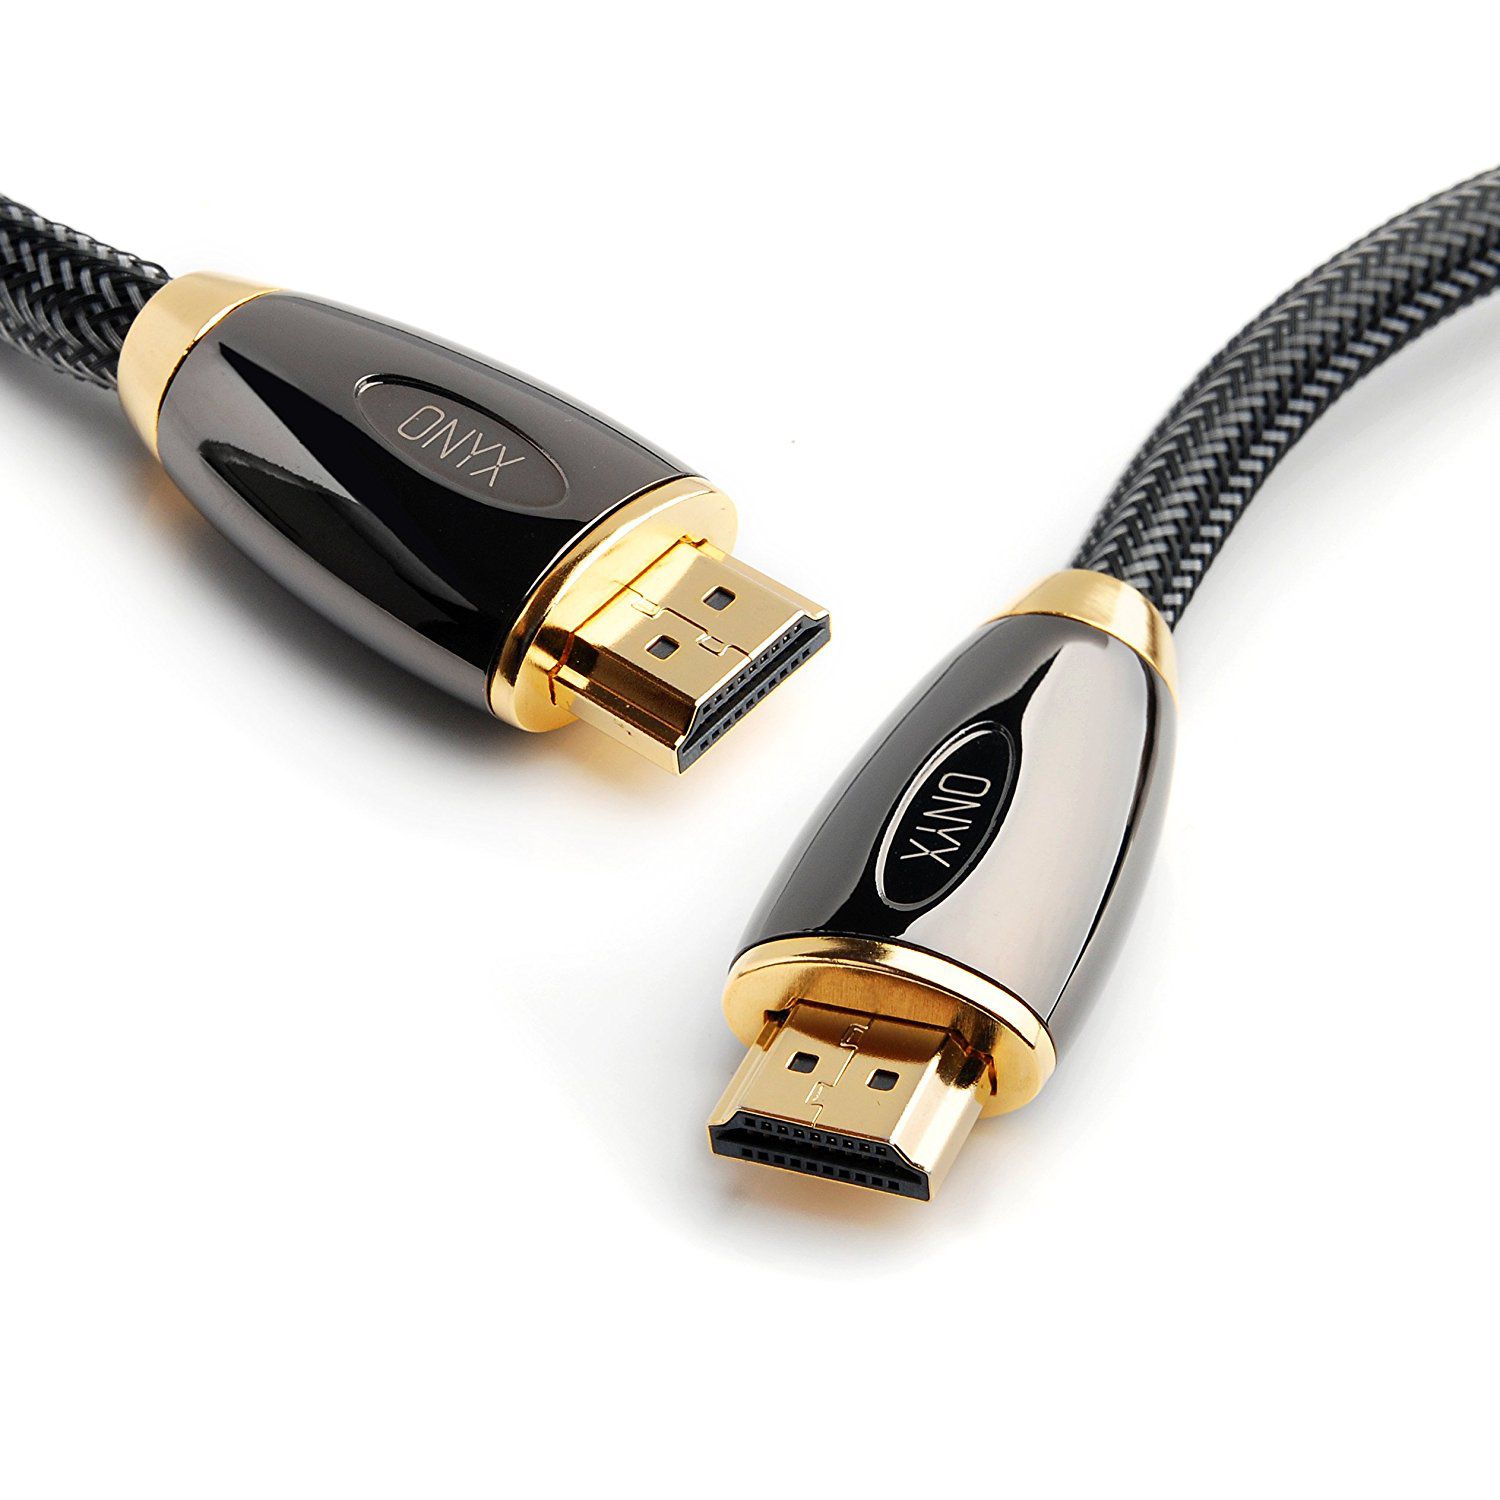 Buy Onyx High-Speed HDMI Cable (15 Feet) - Supports Ethernet, 3D, 4K Ultra HD and Audio Return, MAX Series [HDMI 2.0a for HDR Imaging] Online at Best Price in India - Snapdeal